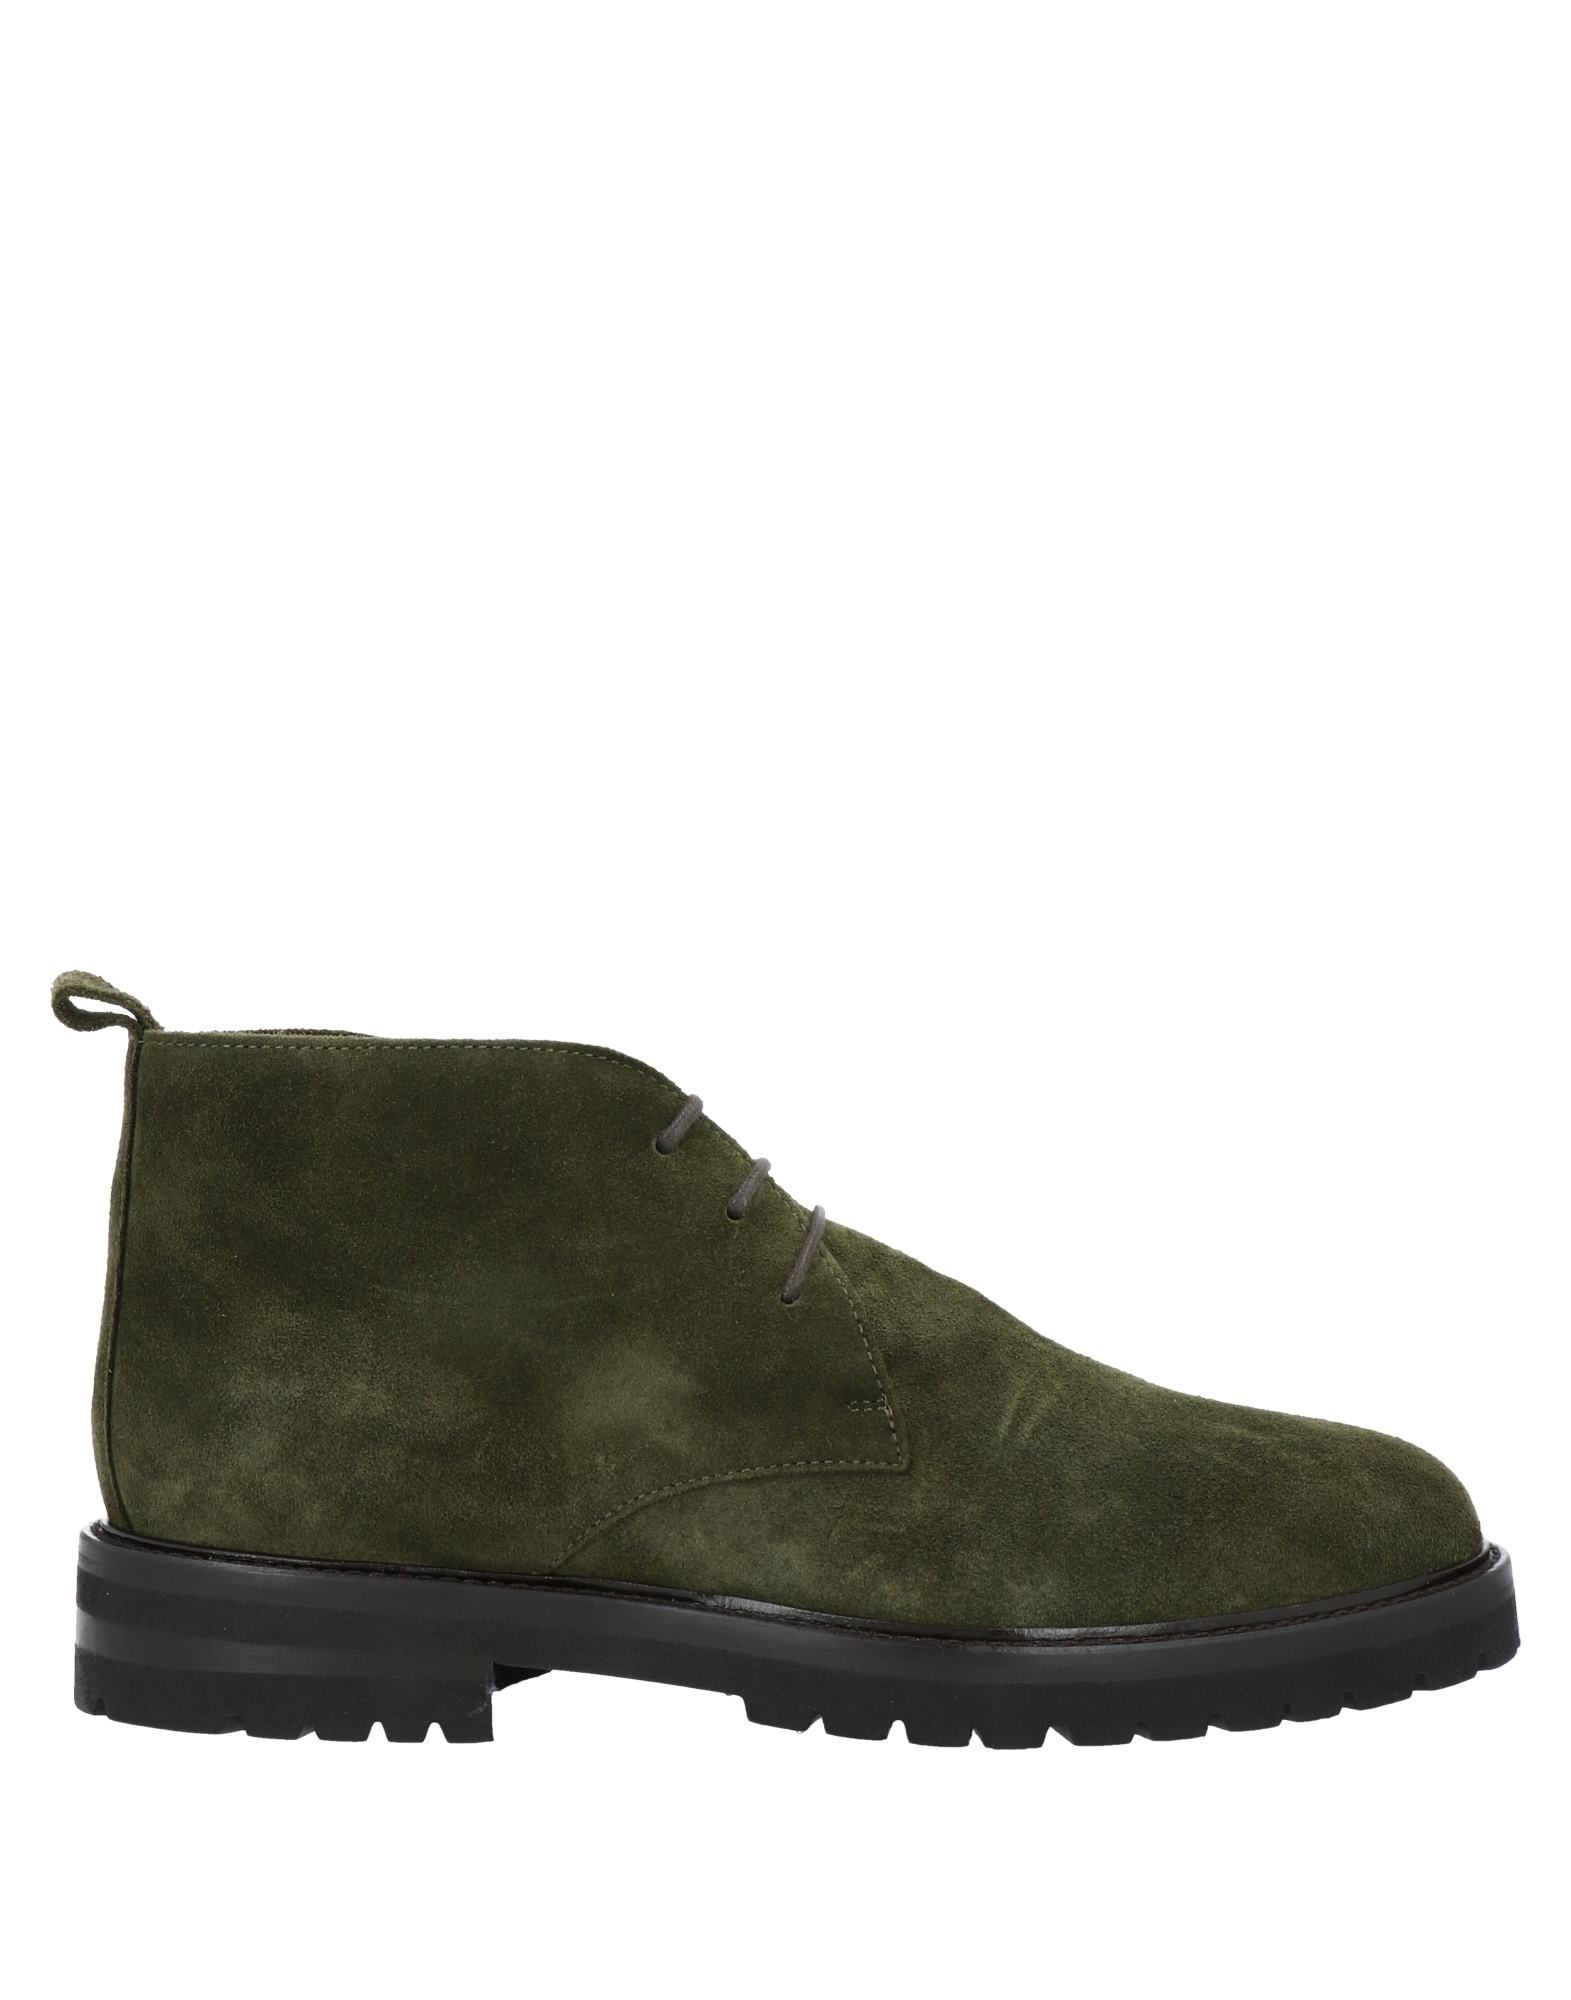 Manifatture Etrusche Ankle Boots In Military Green